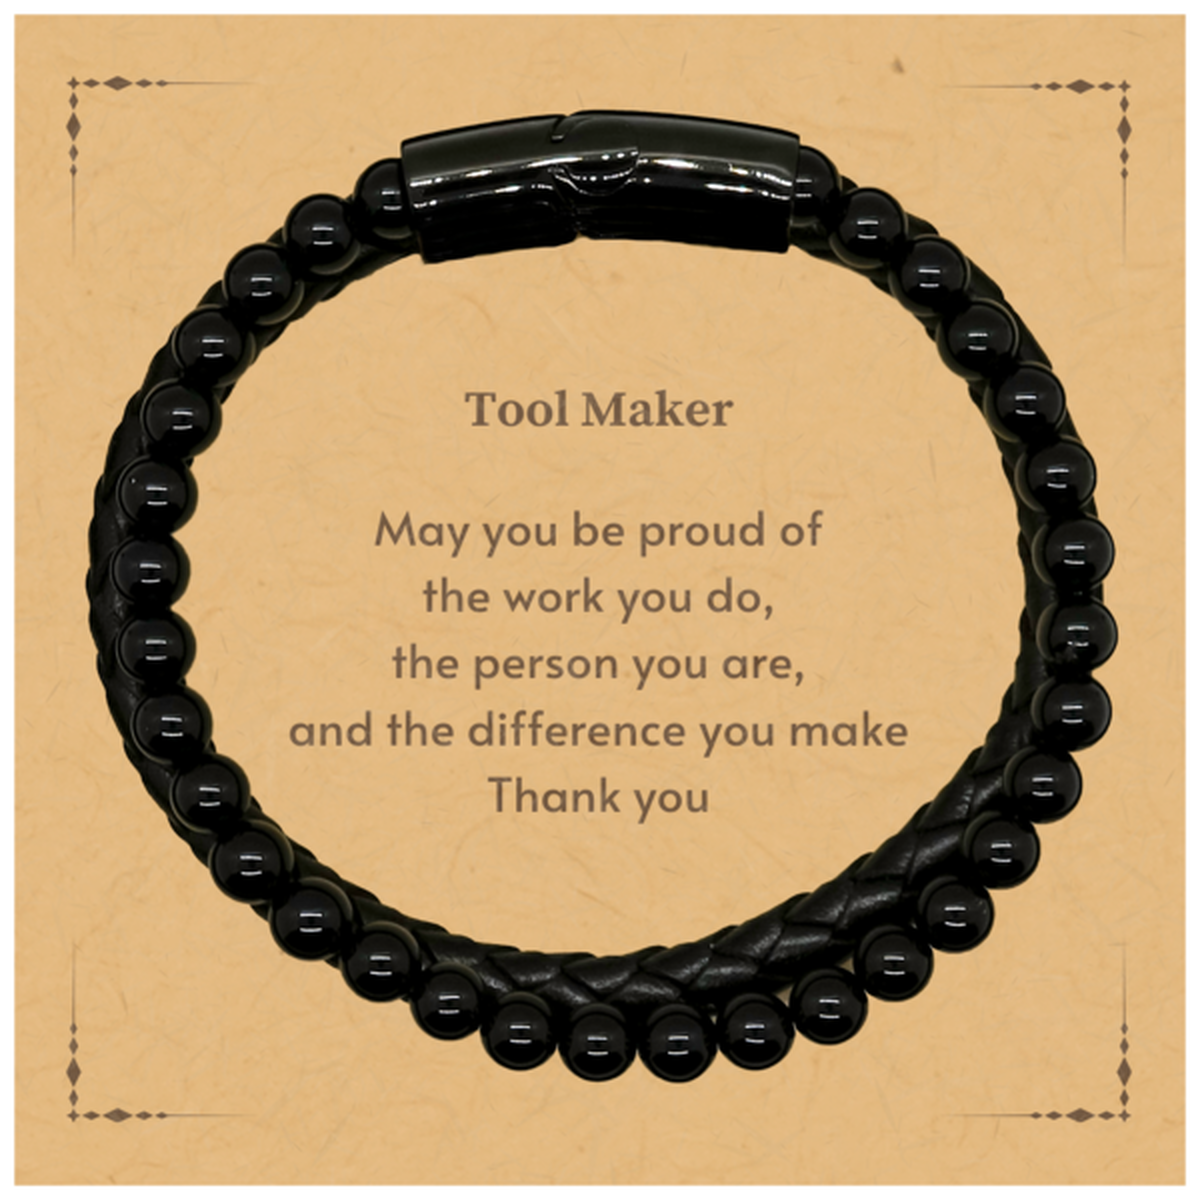 Heartwarming Stone Leather Bracelets Retirement Coworkers Gifts for Tool Maker, Tool Maker May You be proud of the work you do, the person you are Gifts for Boss Men Women Friends